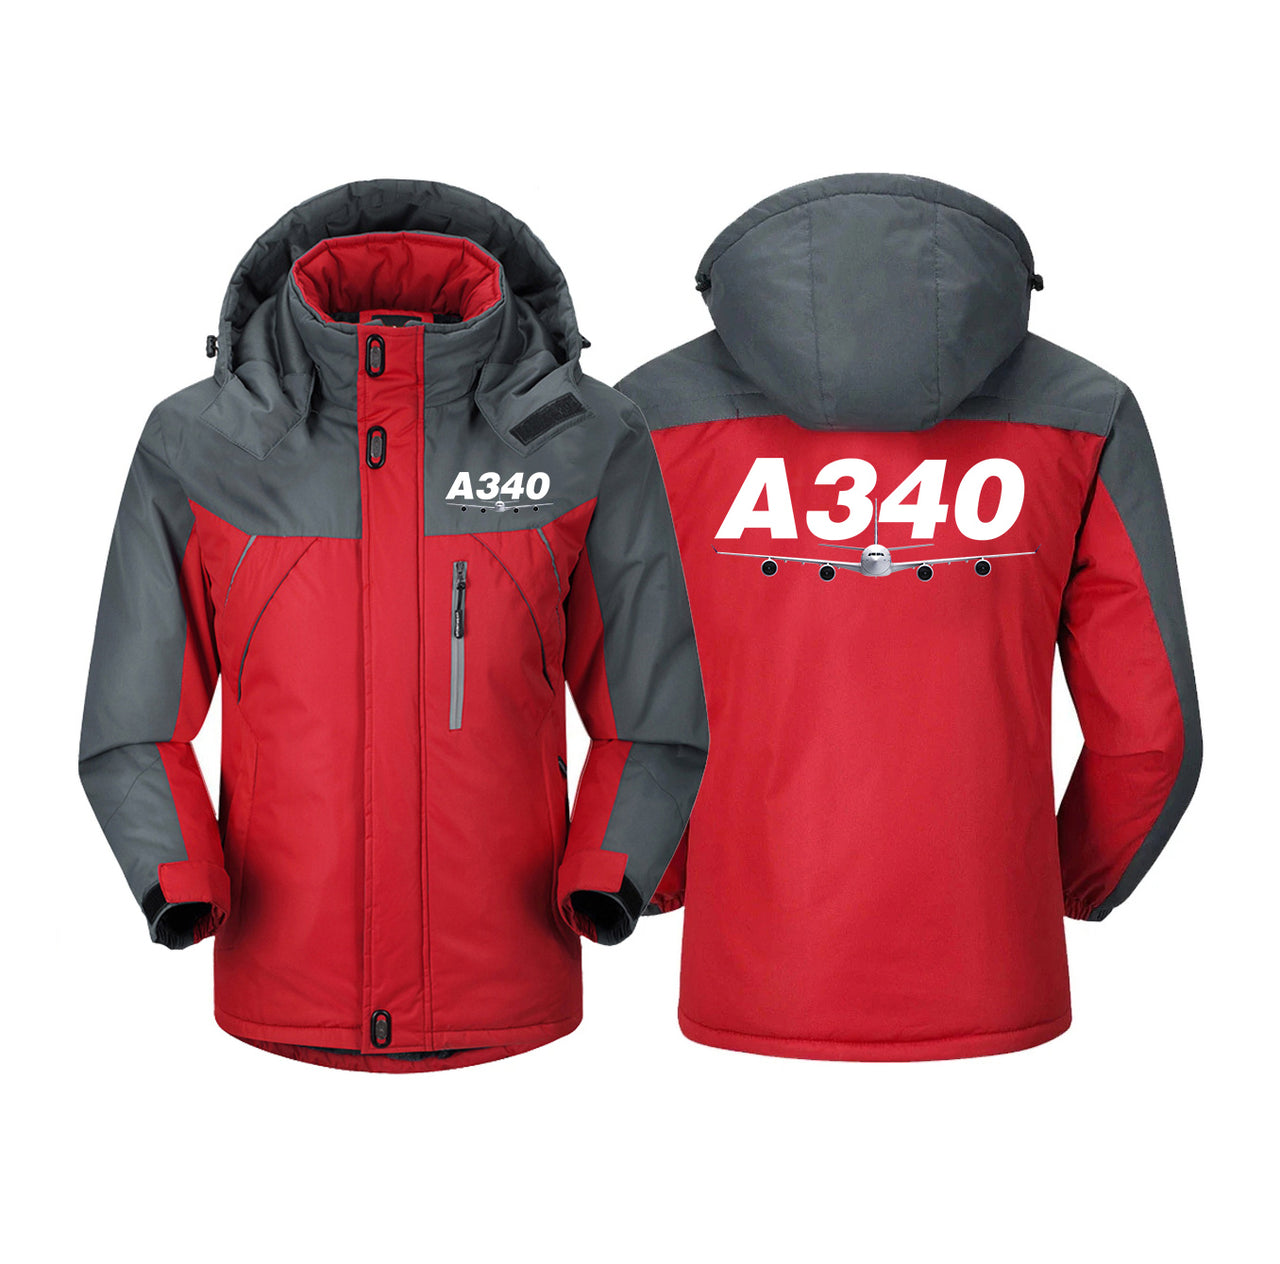 Super Airbus A340 Designed Thick Winter Jackets